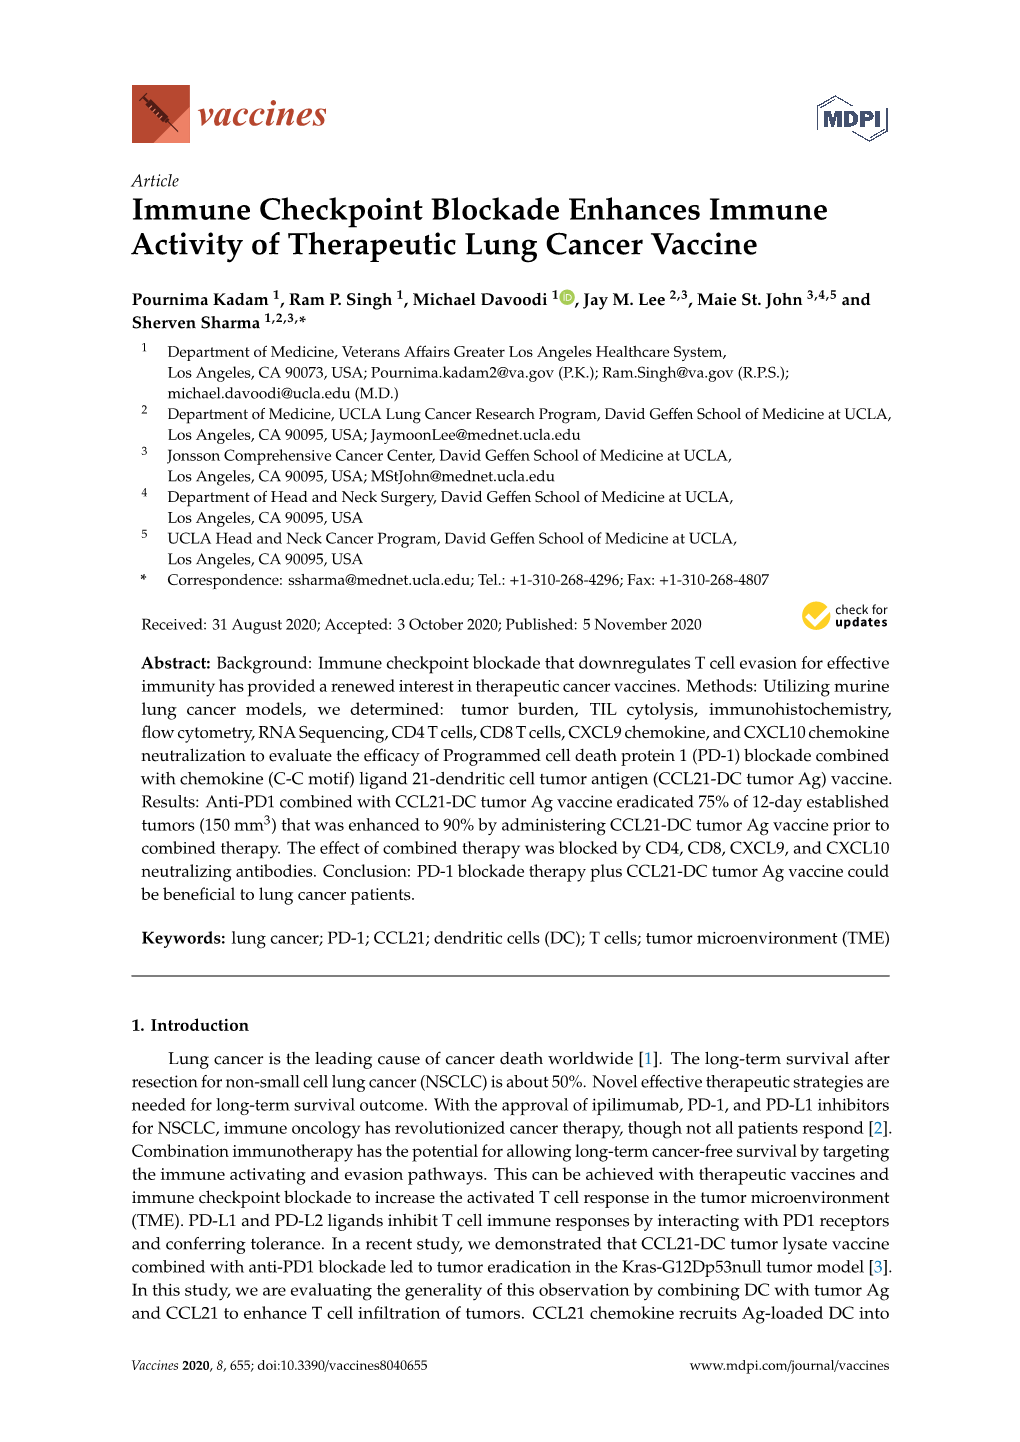 Immune Checkpoint Blockade Enhances Immune Activity of Therapeutic Lung Cancer Vaccine